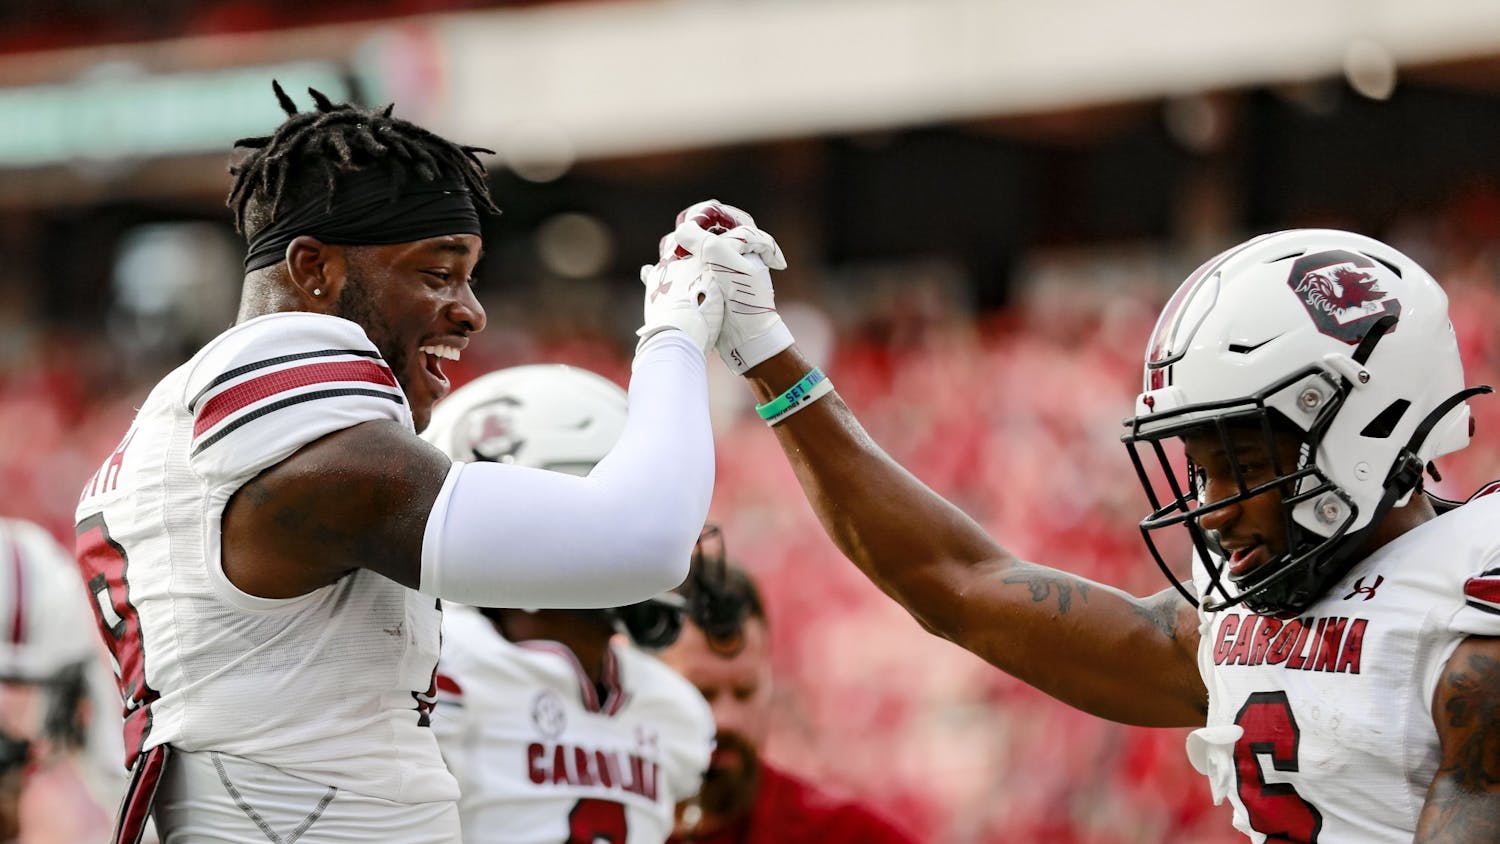 FILE—Redshirt junior defensive back Cam Smith and senior wide receiver Josh Vann have fun before South Carolina's game against Georgia on Sept. 18, 2021. The Gamecocks lost 40-13 to Georgia.&nbsp;